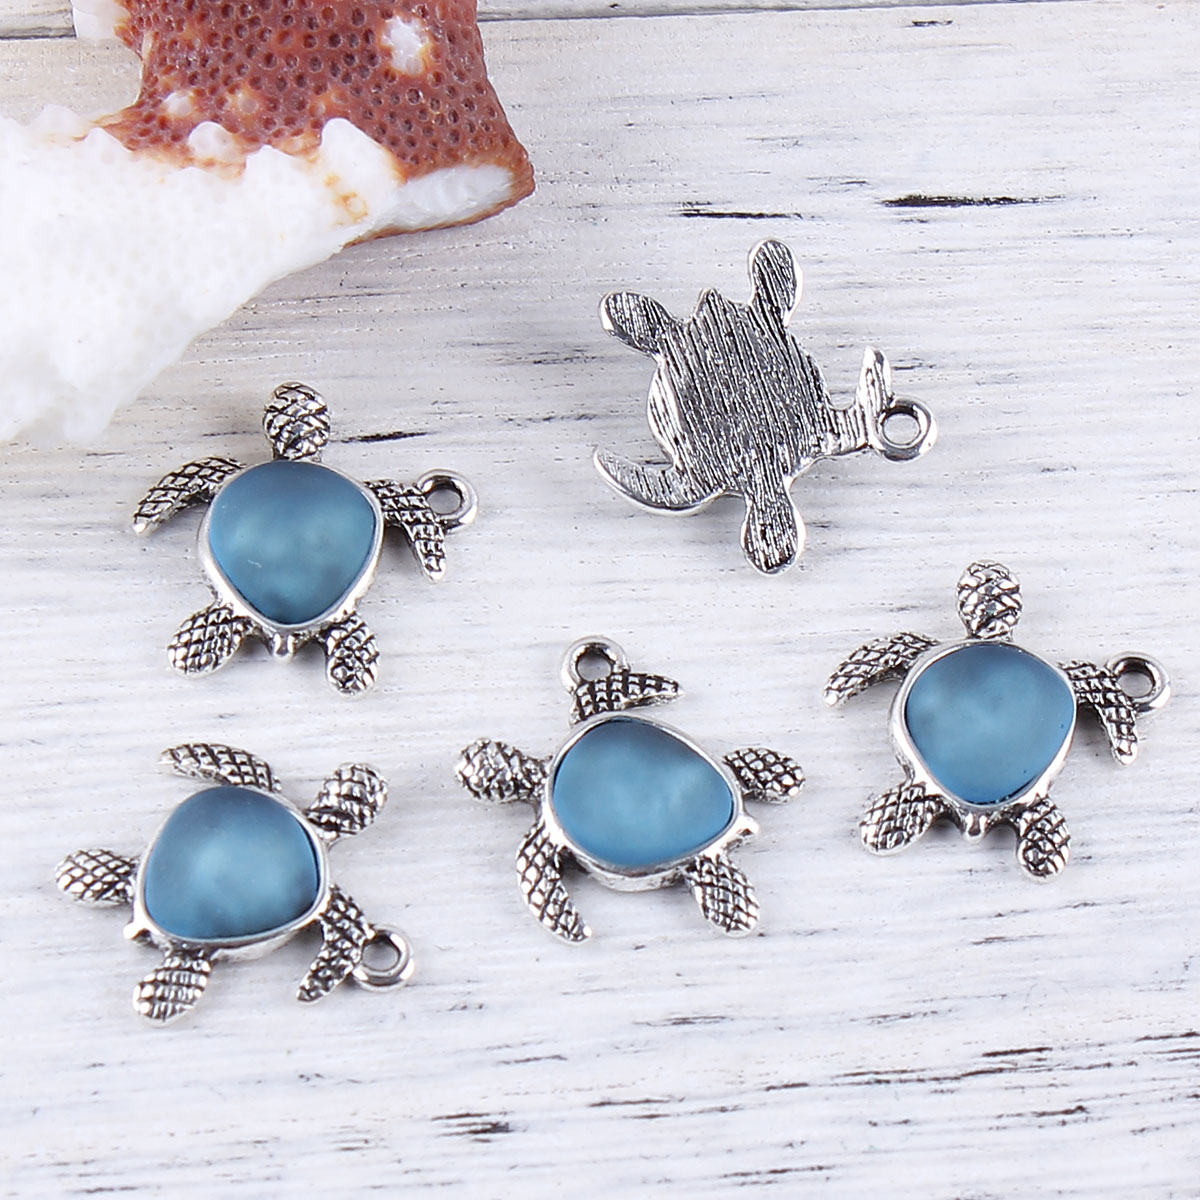 Picture of Zinc Based Alloy Sea Glass Charms Sea Turtle Animal Antique Silver Blue 21mm( 7/8") x 20mm( 6/8"), 5 PCs